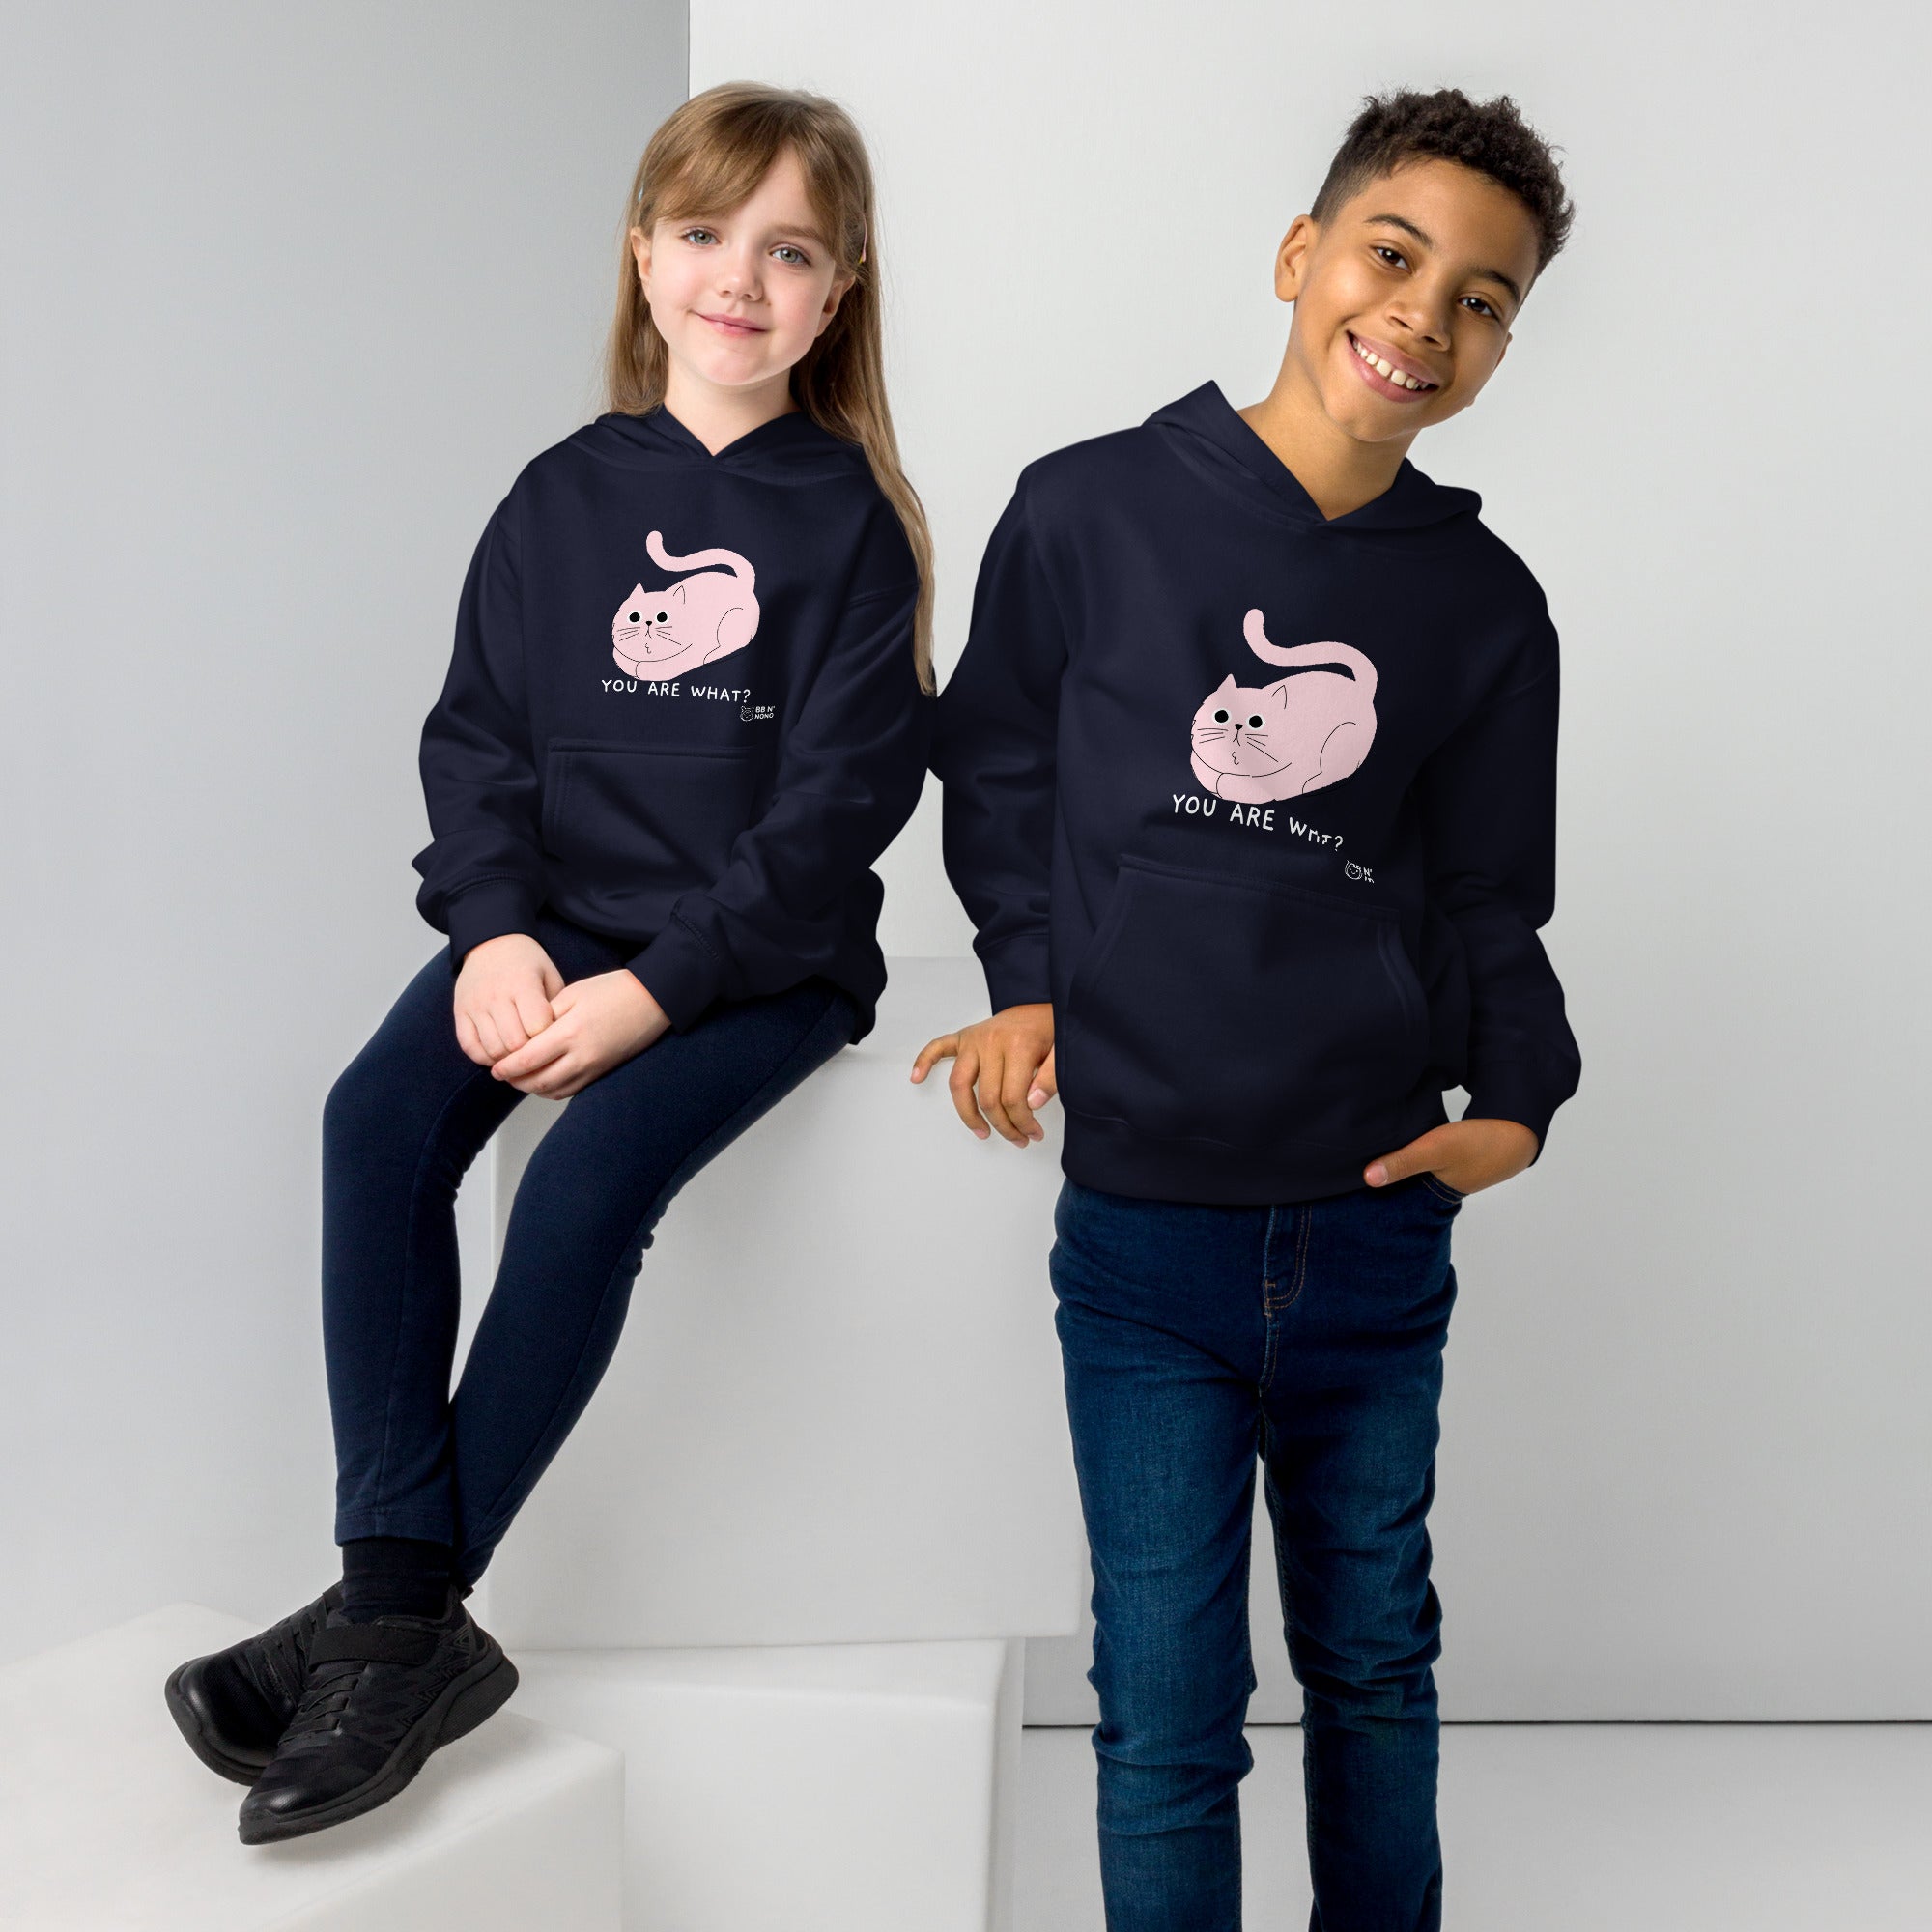 You are what? - Kids fleece hoodie